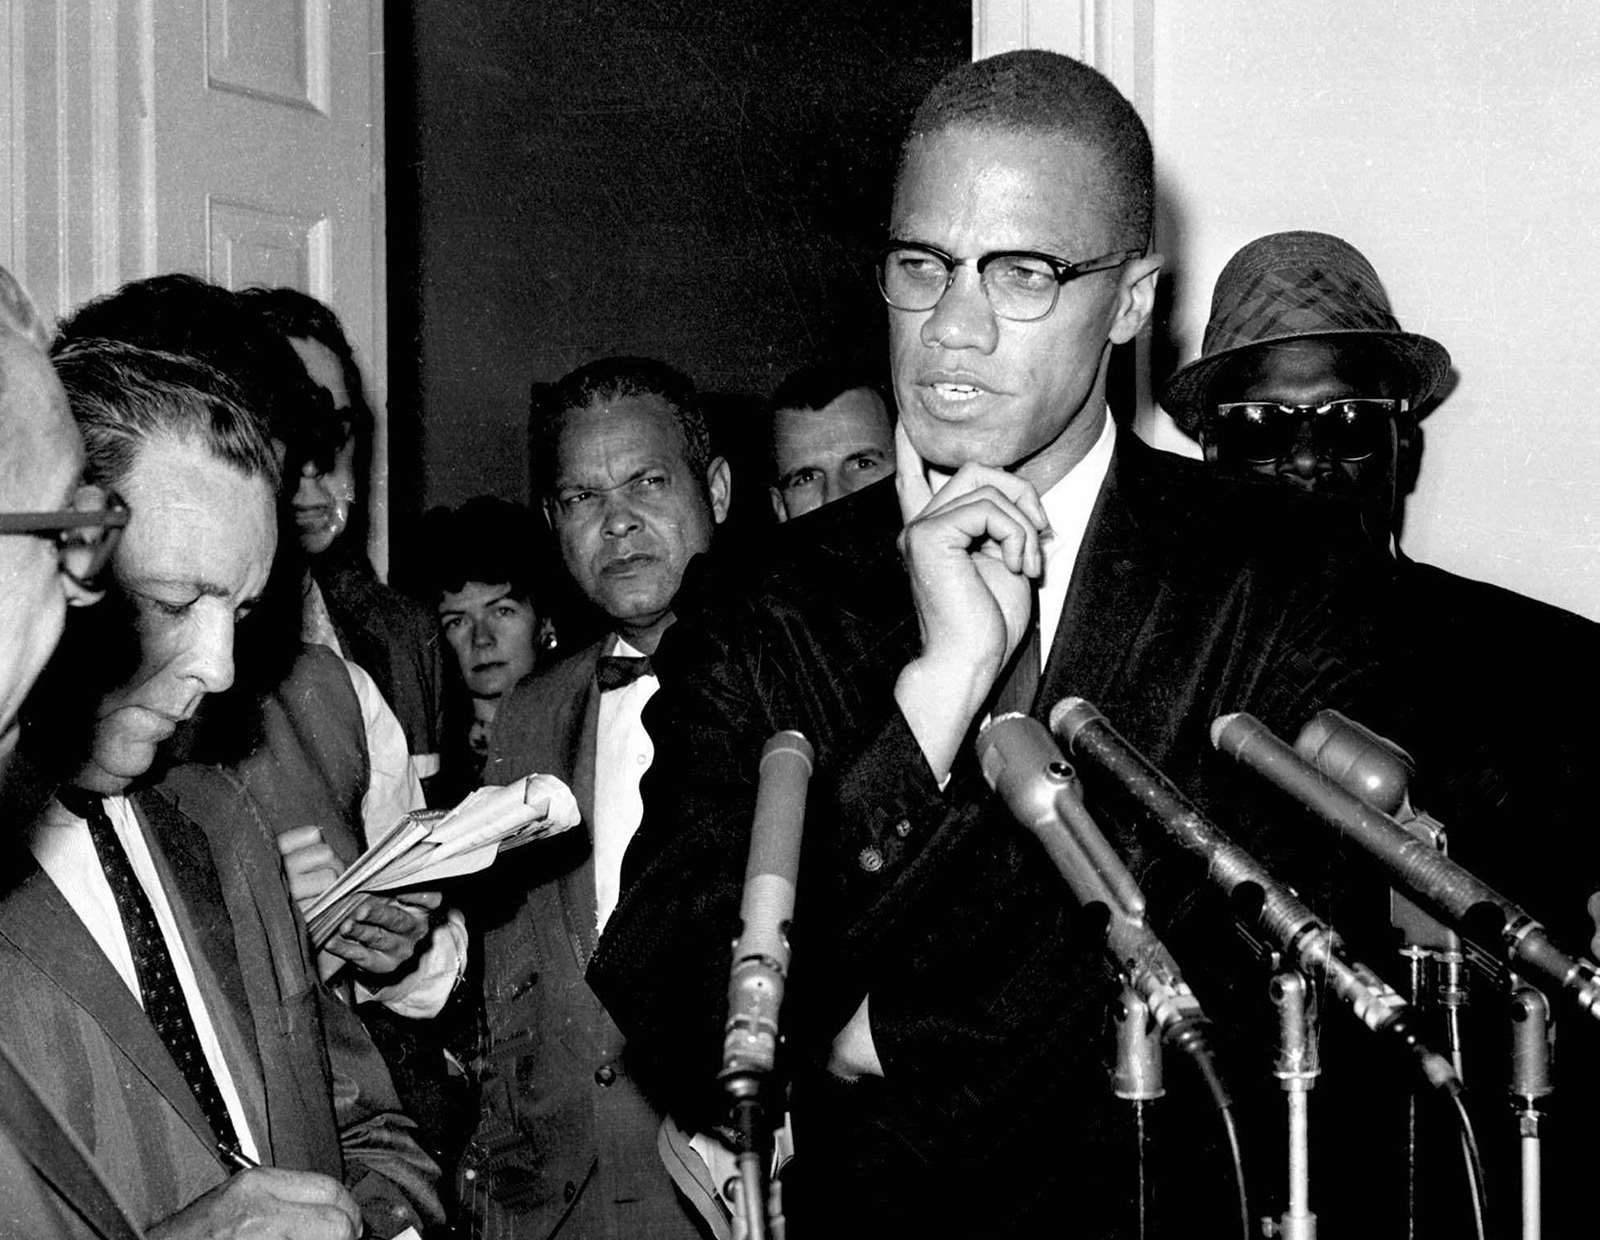 In this May 16, 1963, file photo, civil rights leader Malcolm X speaks to reporters in Washington, D.C. (AP Photo/file)